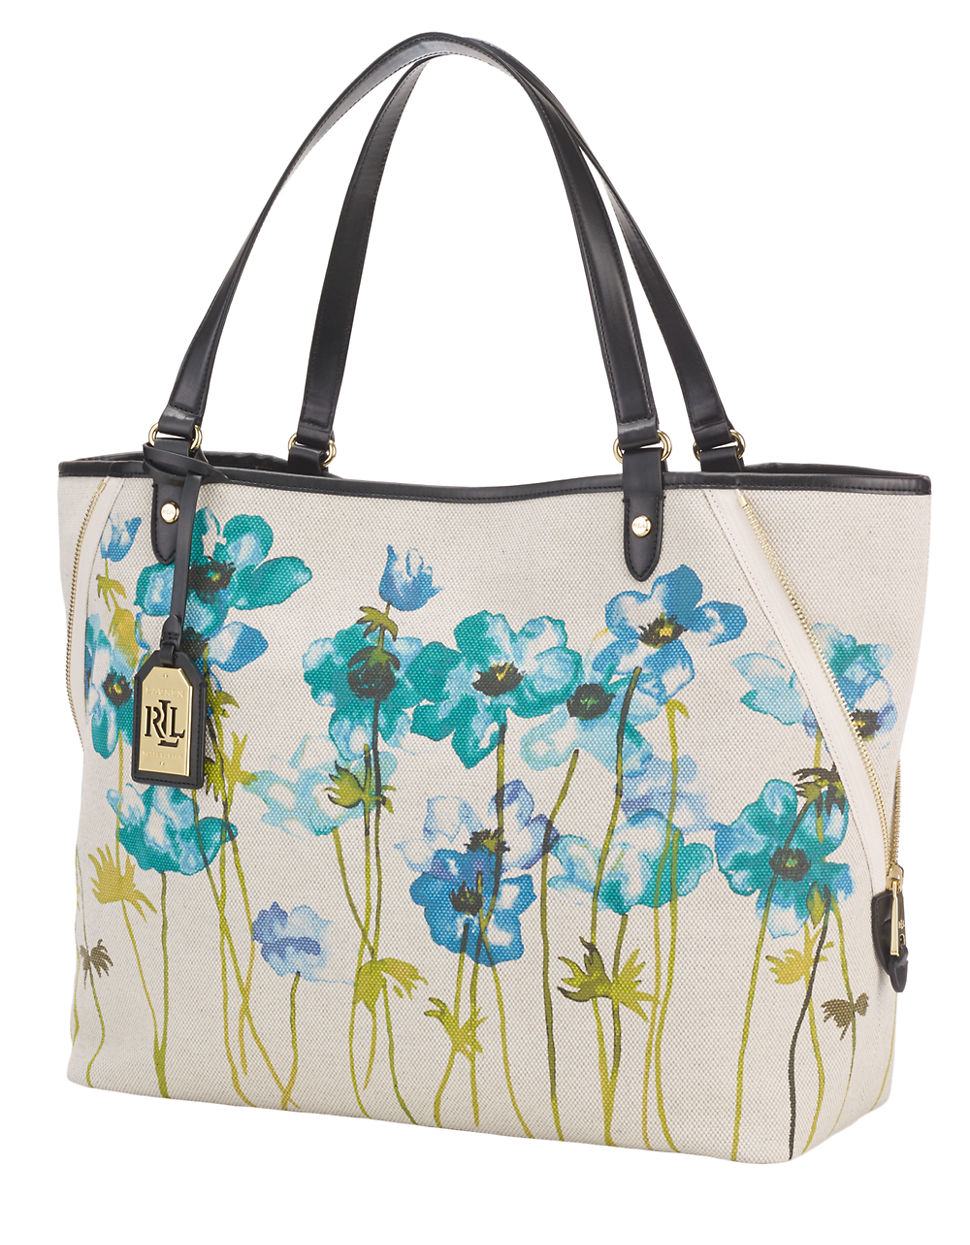 Lauren by ralph lauren Large Floral Canvas Tote in Green (Lagoon) | Lyst